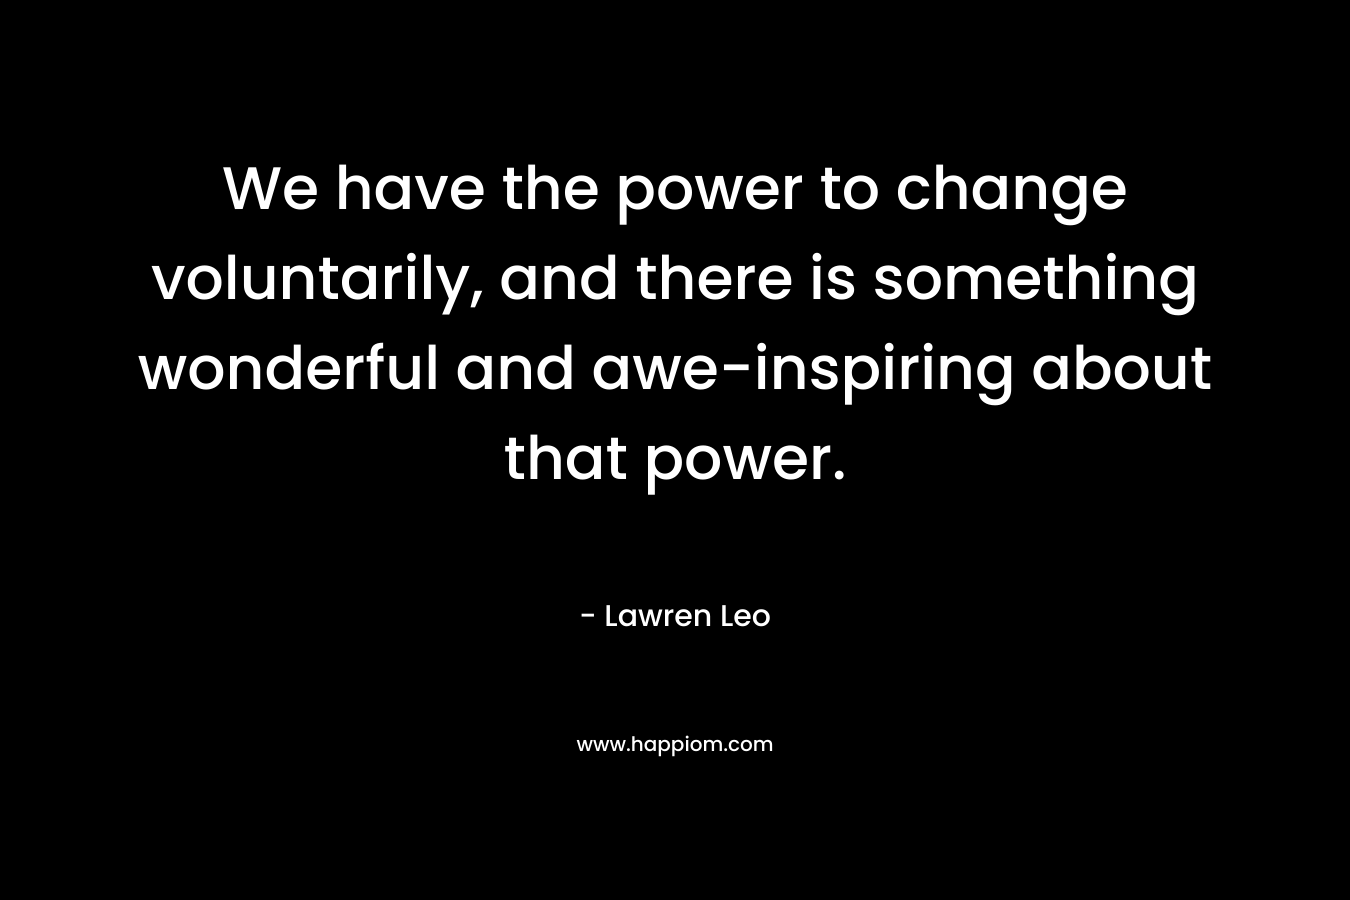 We have the power to change voluntarily, and there is something wonderful and awe-inspiring about that power. – Lawren Leo